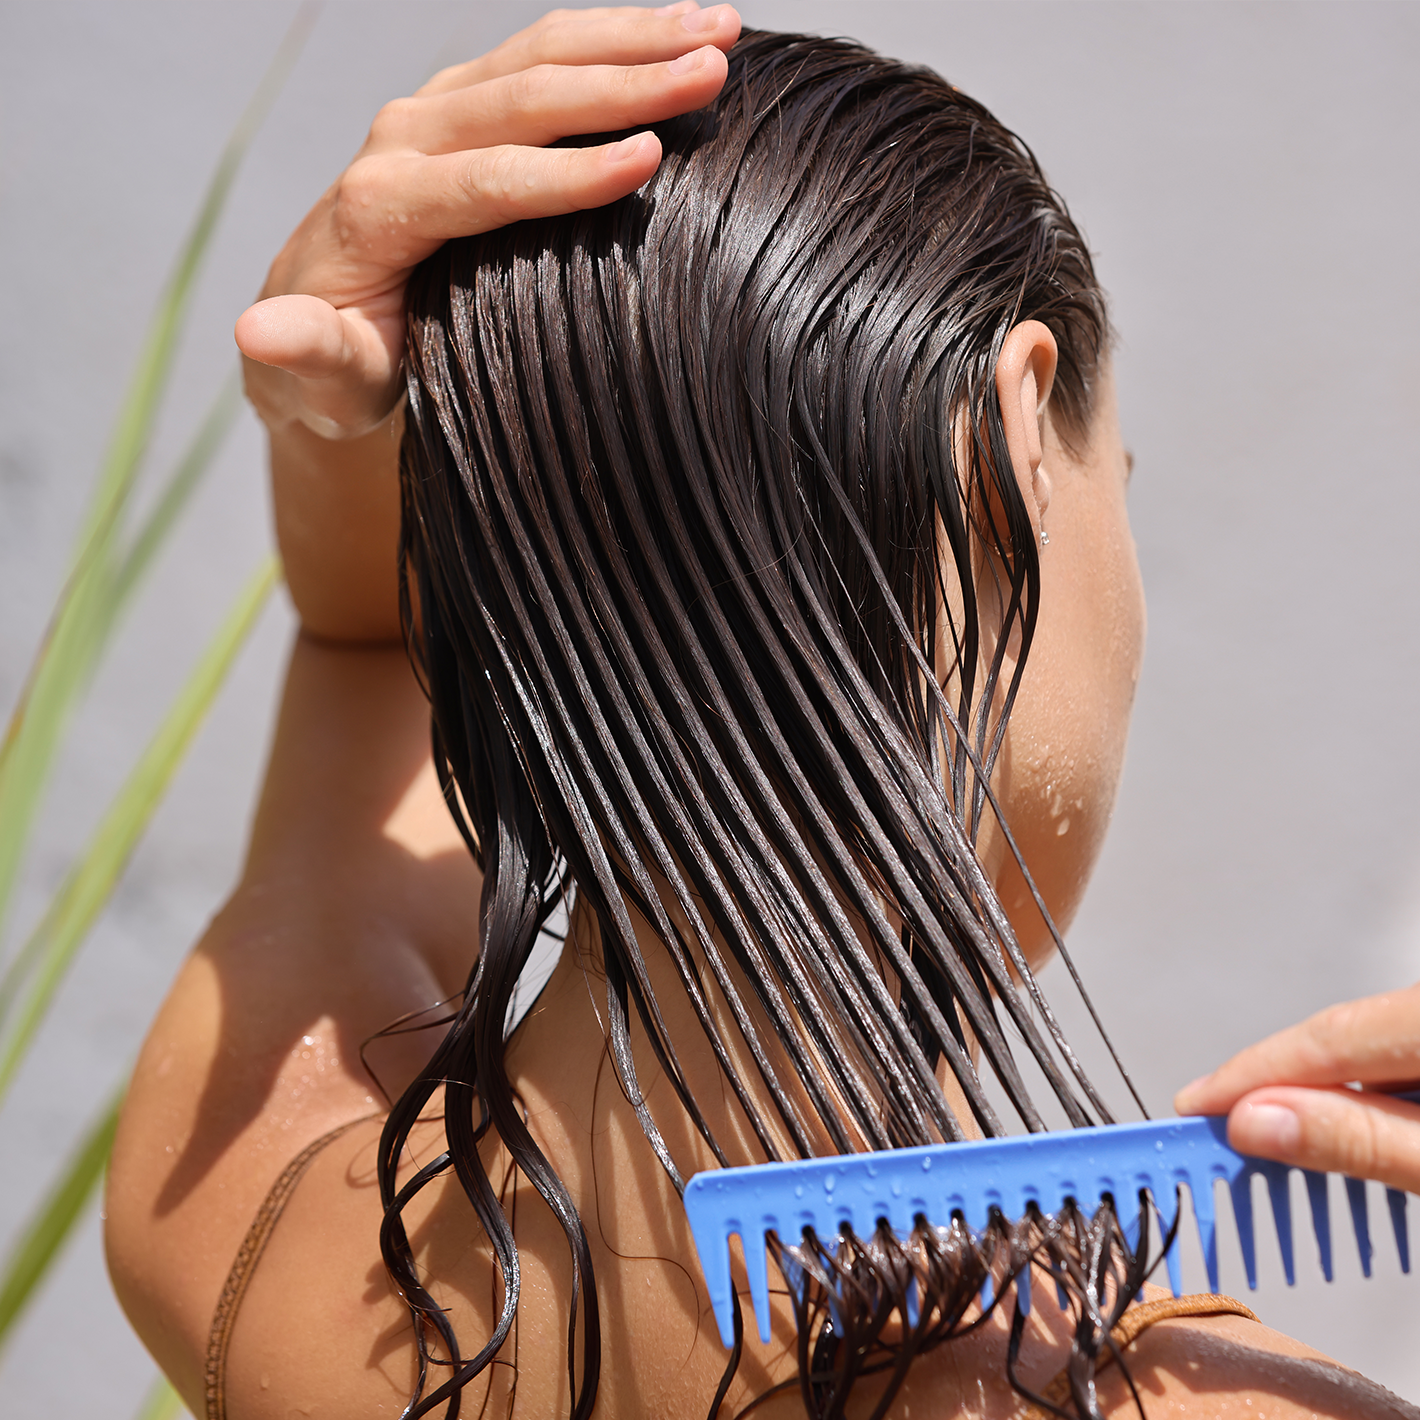 Woman combing out her wet hair.